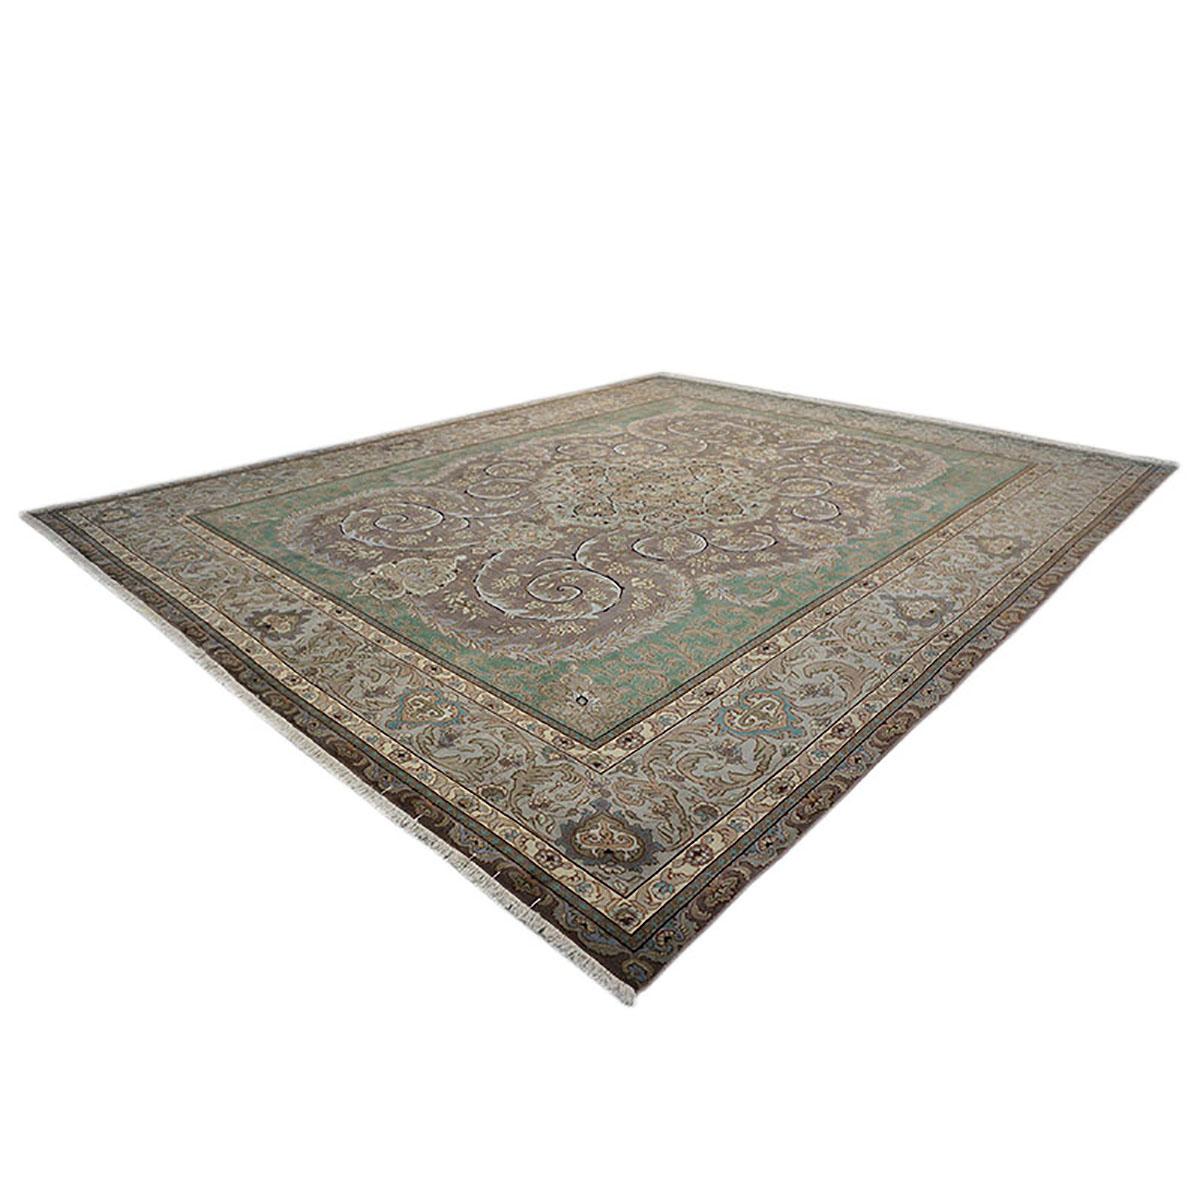 Antique Persian Tabriz 9x12 Green, Brown, & Taupe Handmade Area Rug In Good Condition For Sale In Houston, TX